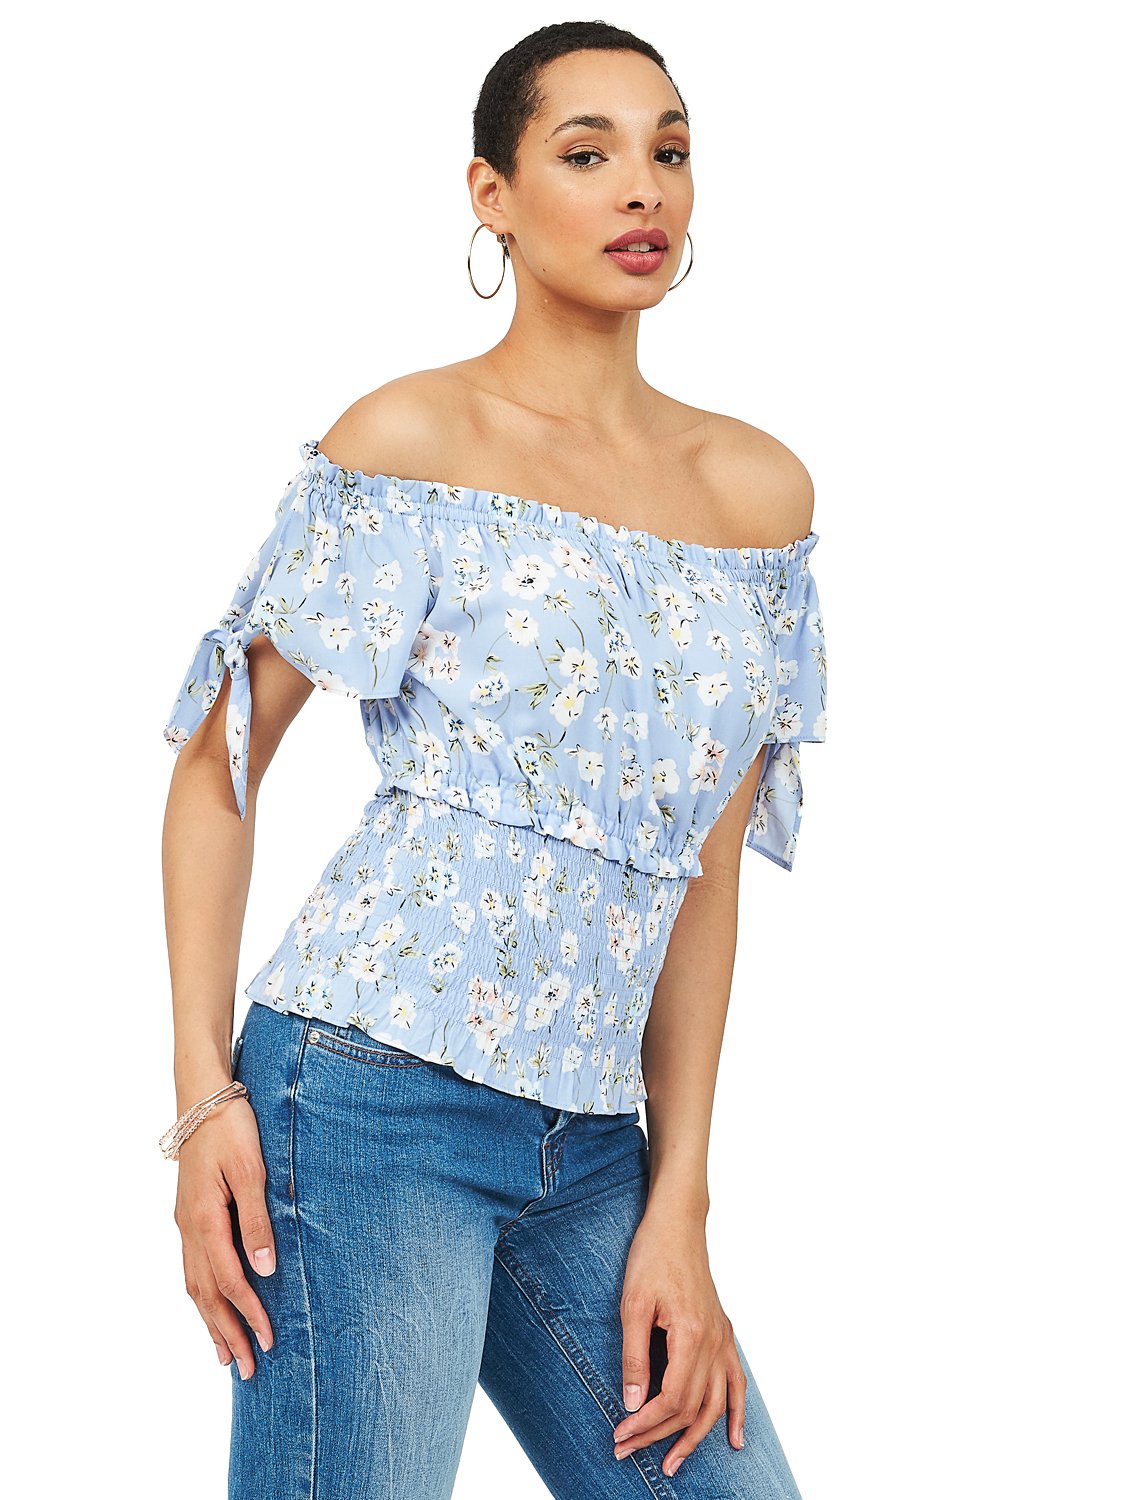 The Best Floral Tops | Fashion Style Guru